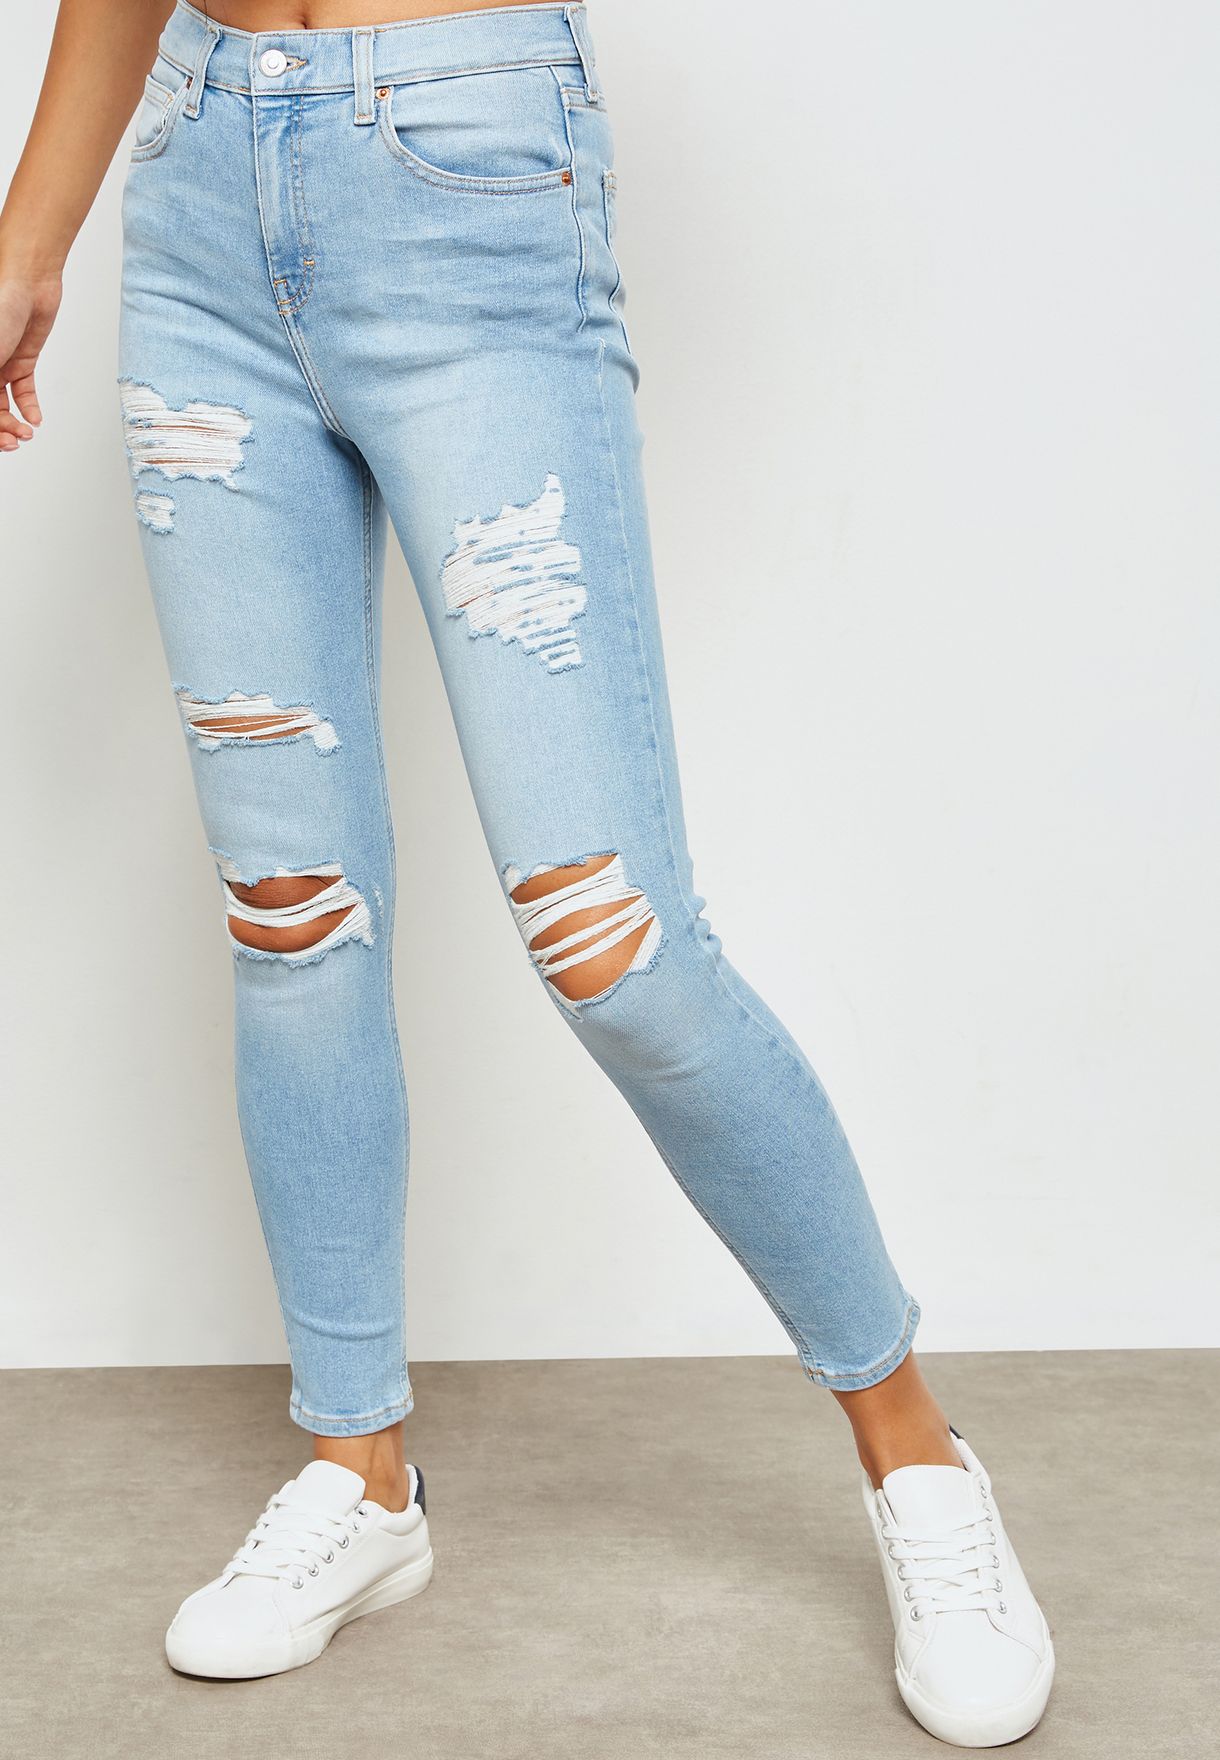 topshop blue ripped jamie jeans